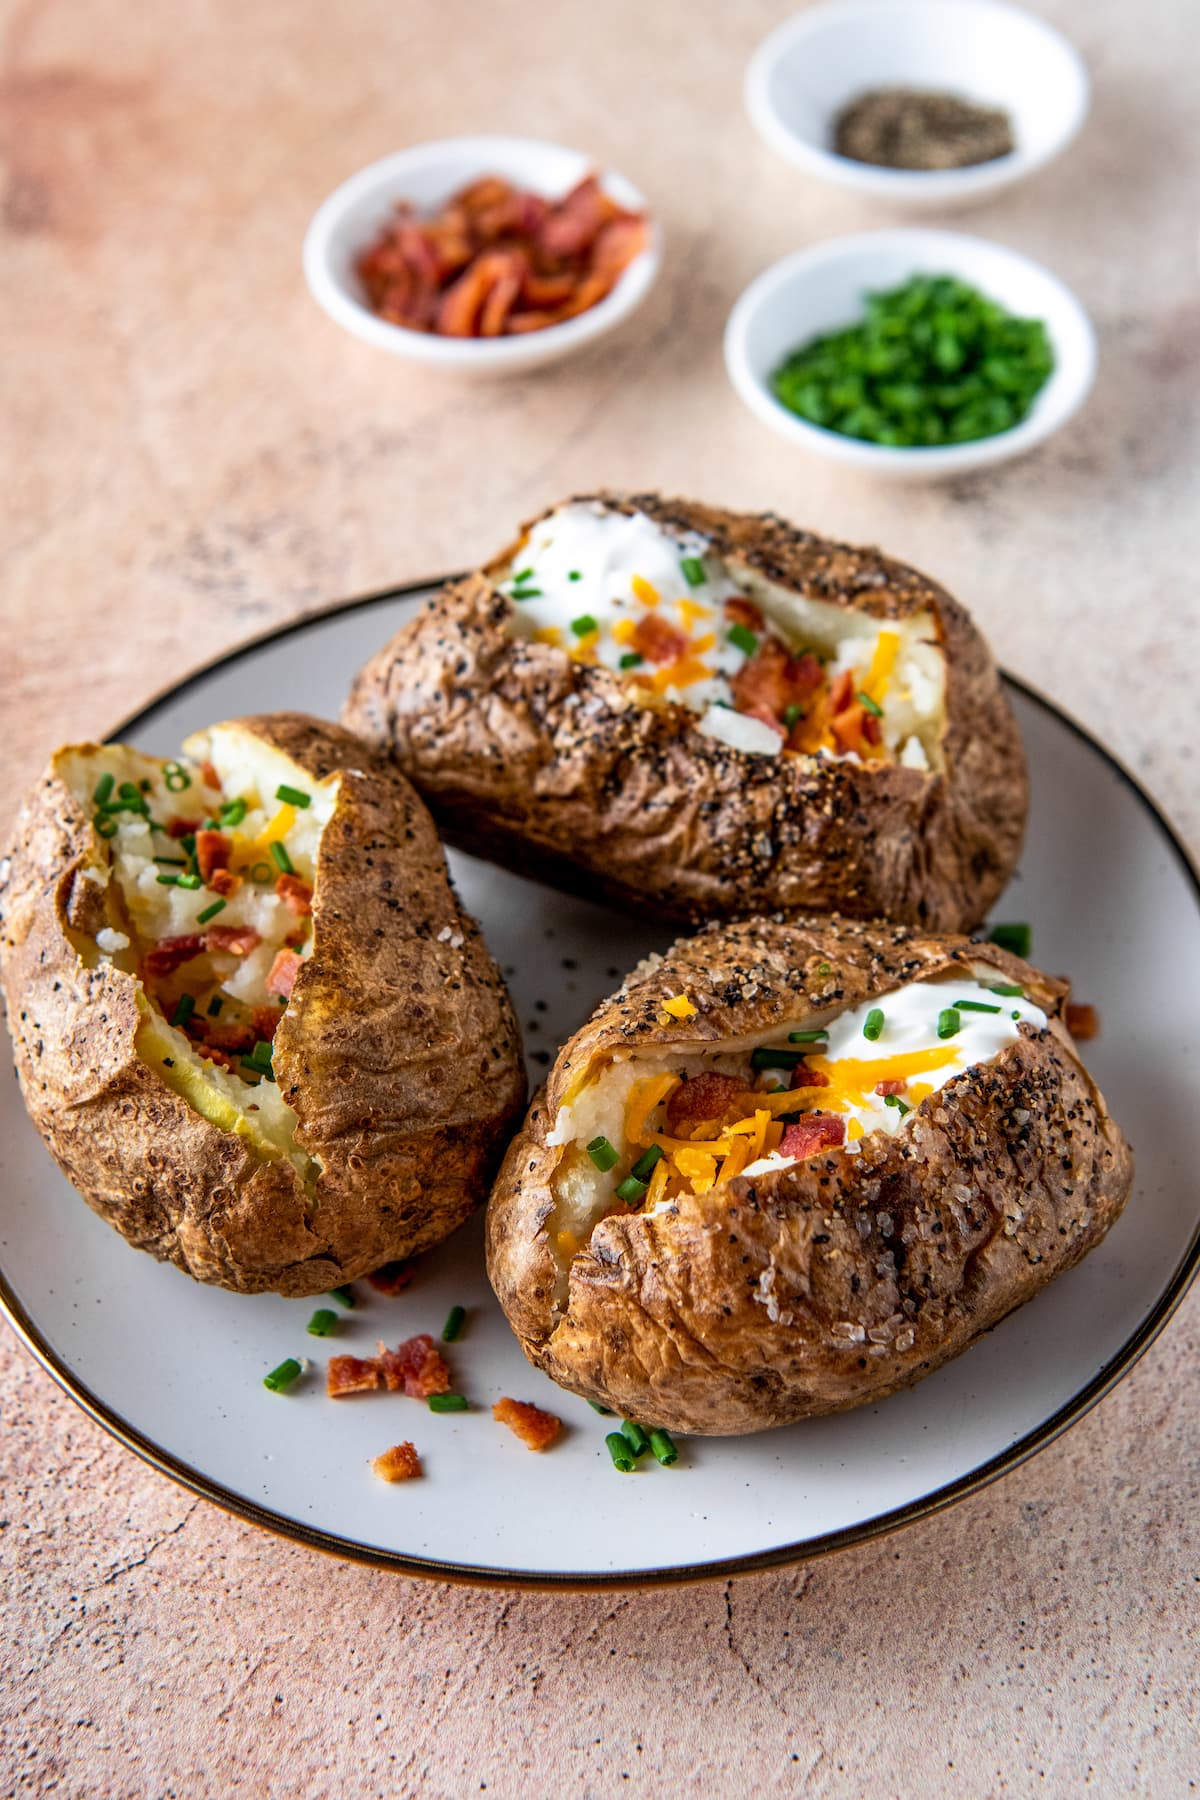 a plate with three loaded baked potatoes